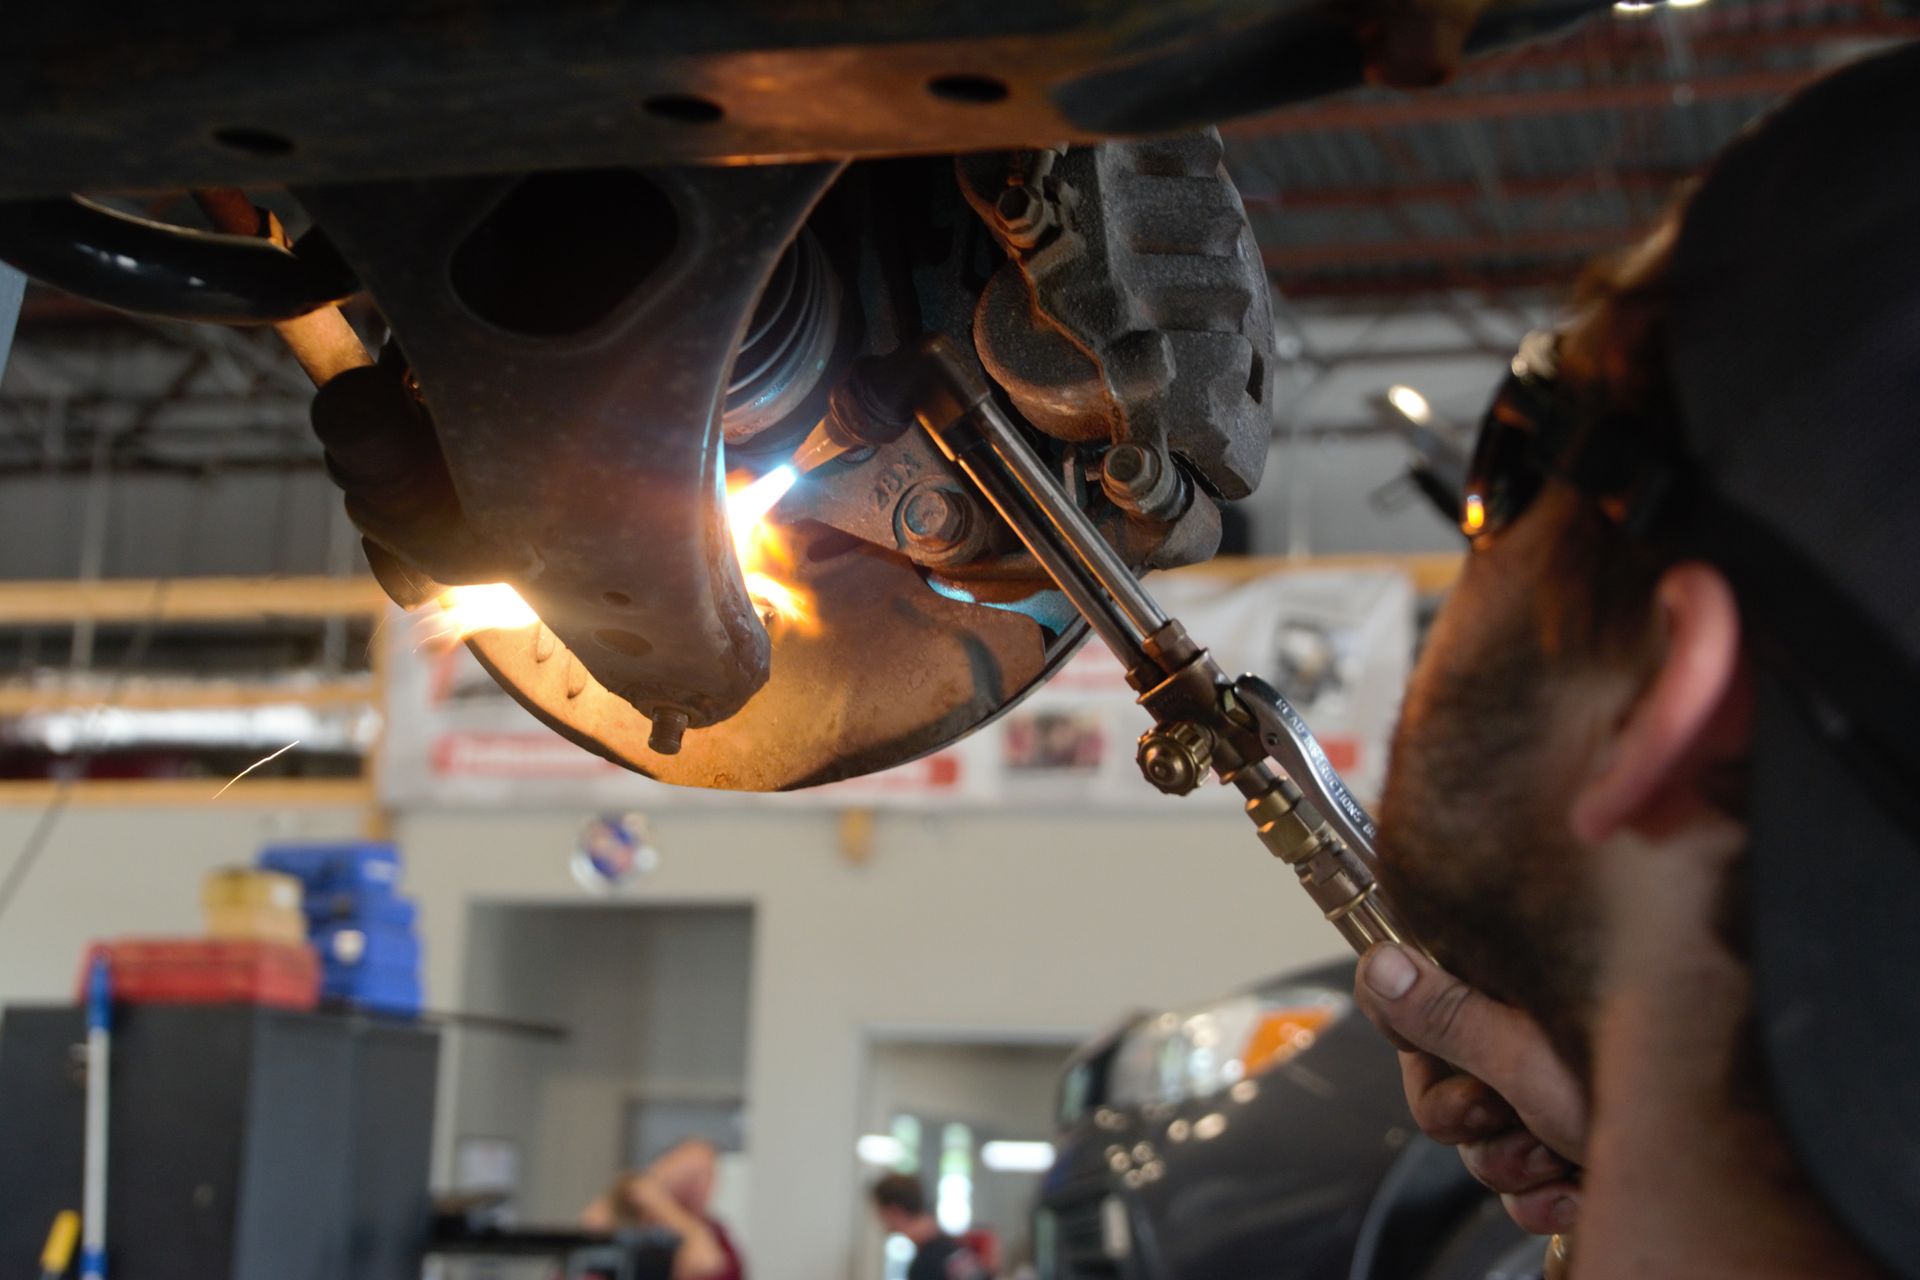 European Auto Repair: 5 Key Differences Between Dealerships and Independent Shops